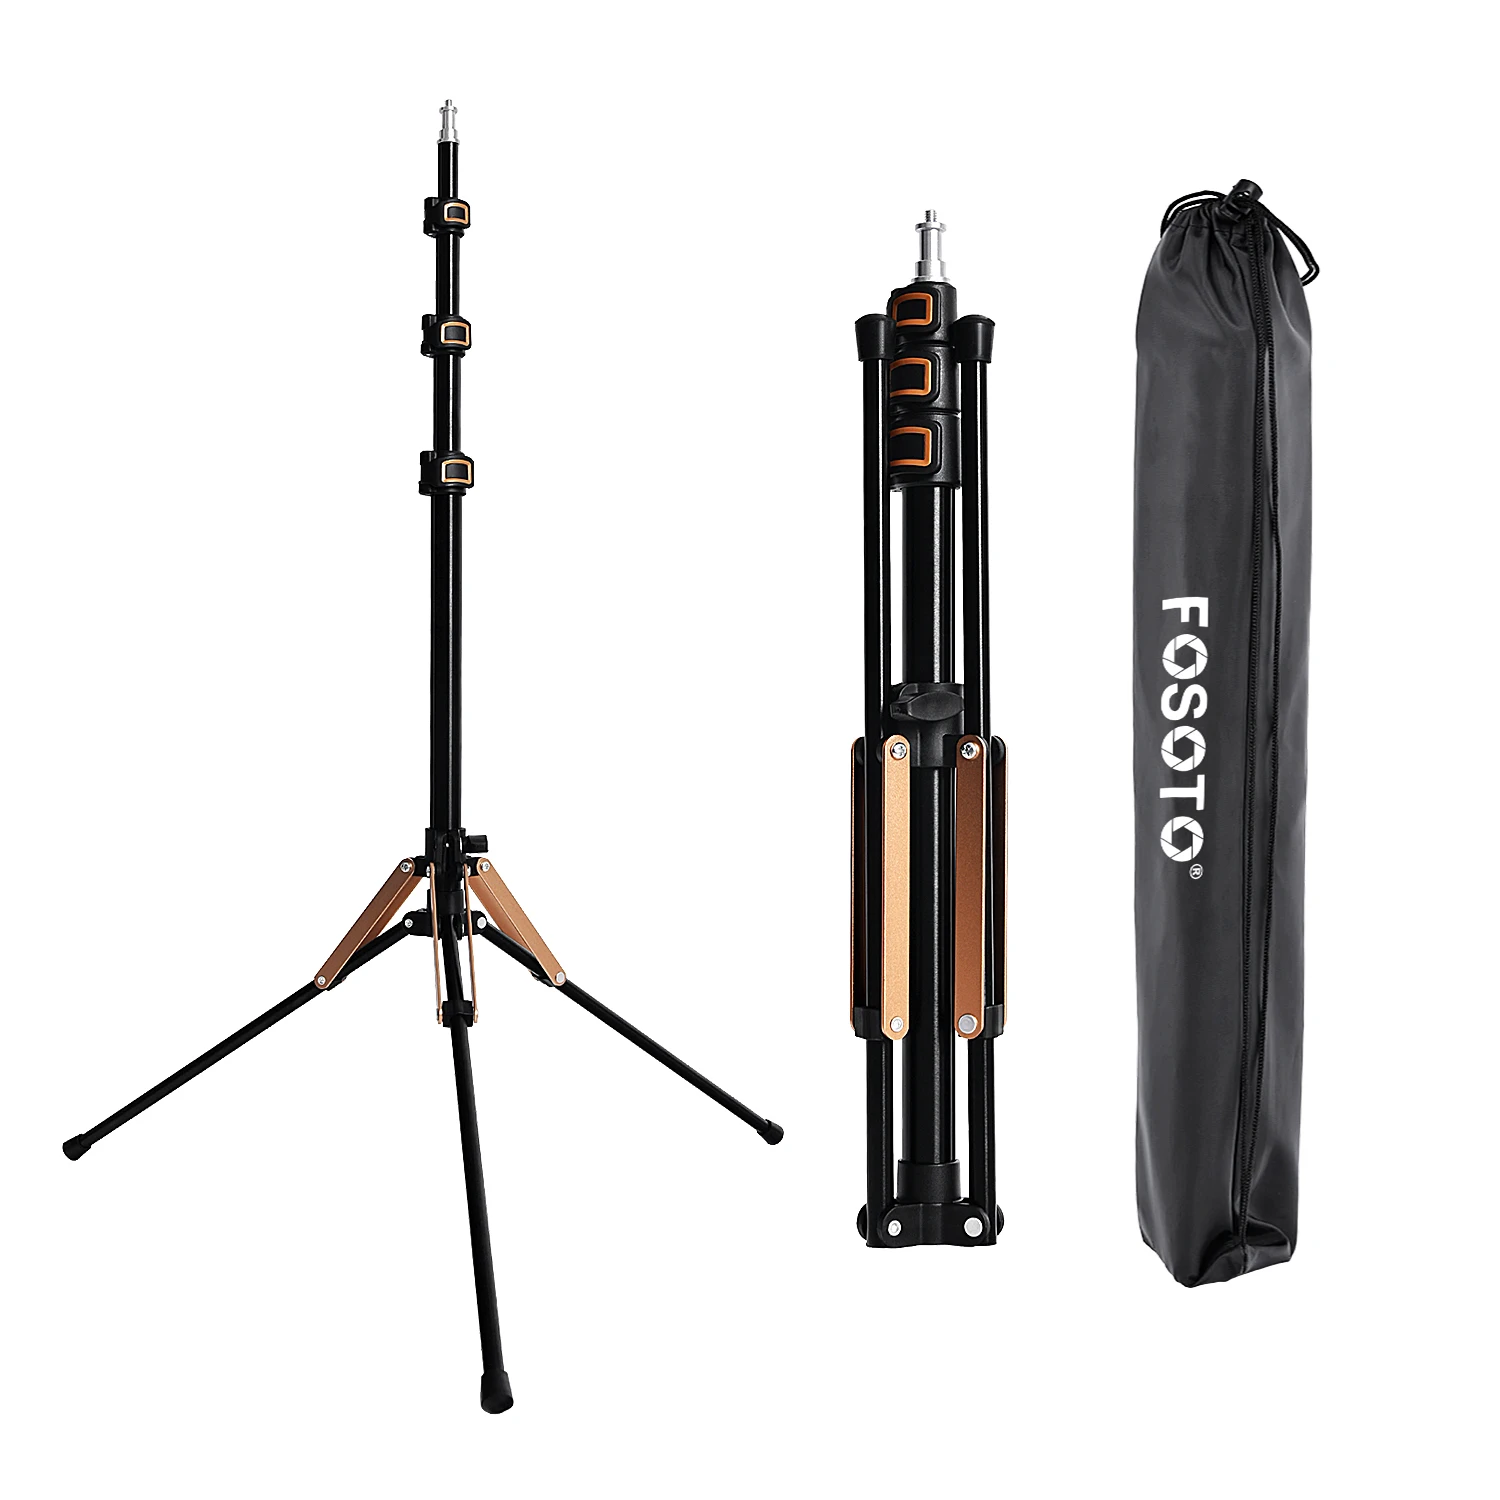 

FOSOTO FT-195 Lightweight 2M Studio Tripod Stand with 1/4 Screw Head for Camera Photographic Ring Light Flash Umbrella Reflector